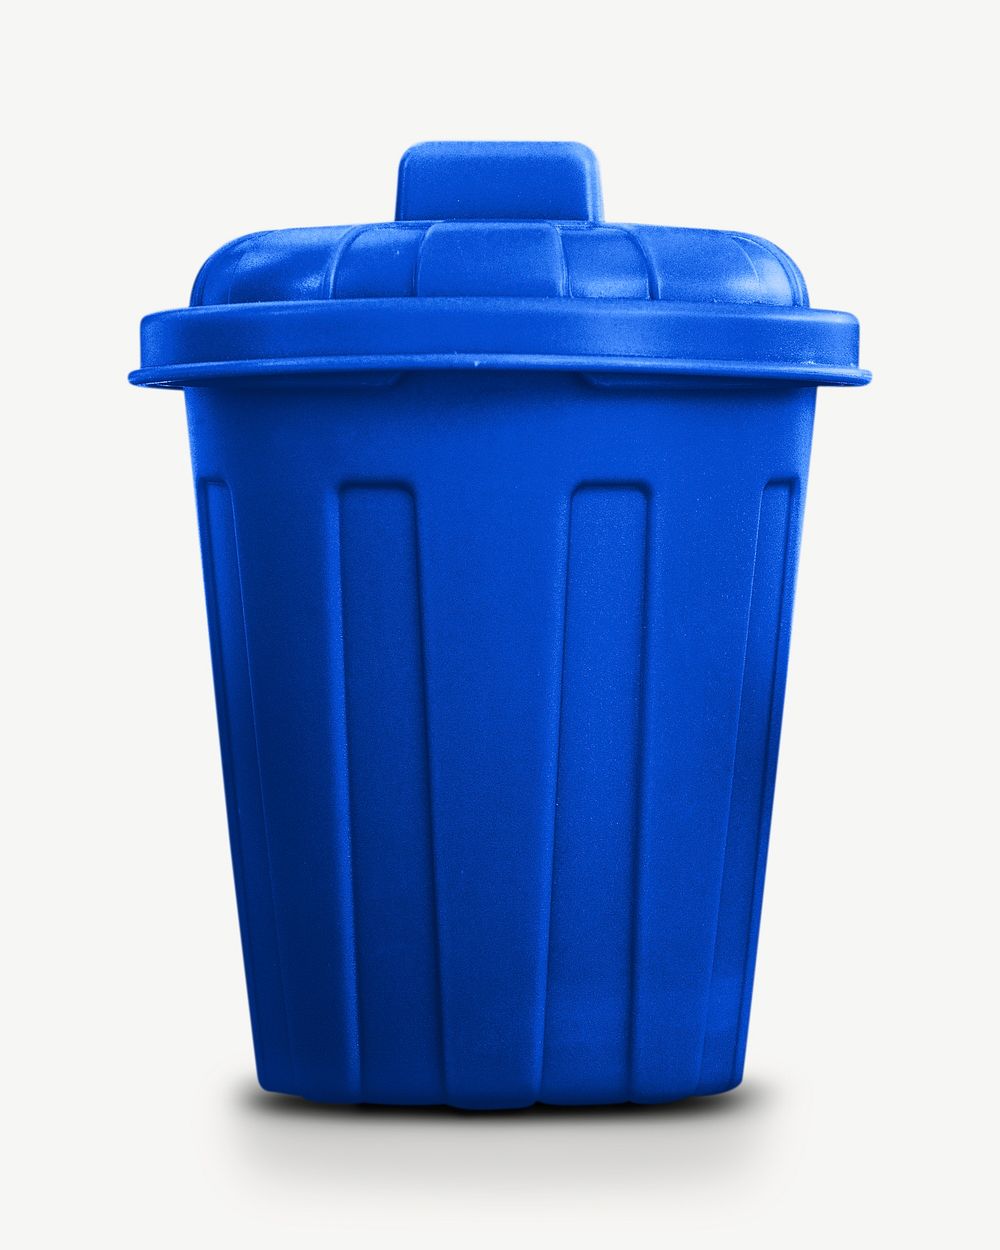 Blue garbage bin isolated graphic psd